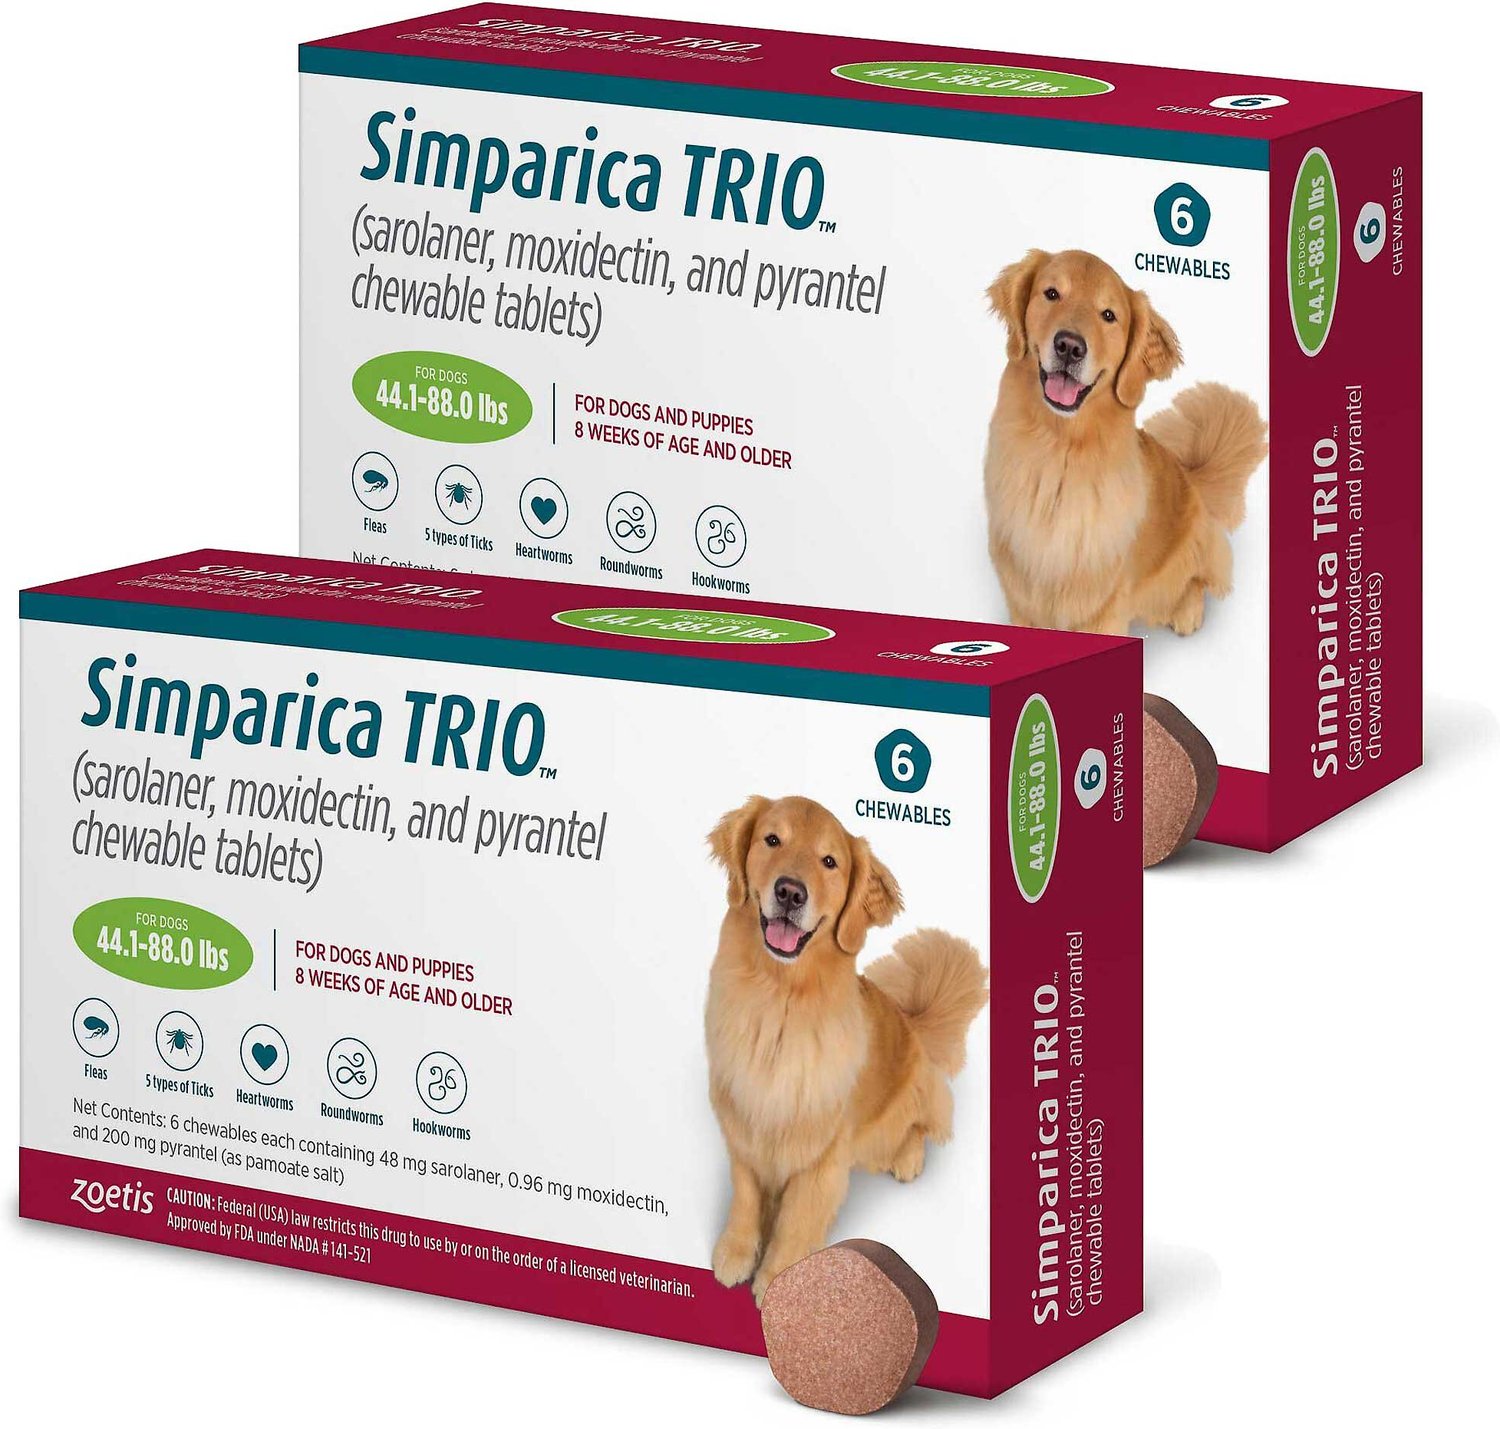 simparica-trio-chewable-tablet-for-dogs-44-1-88-lbs-green-box-12